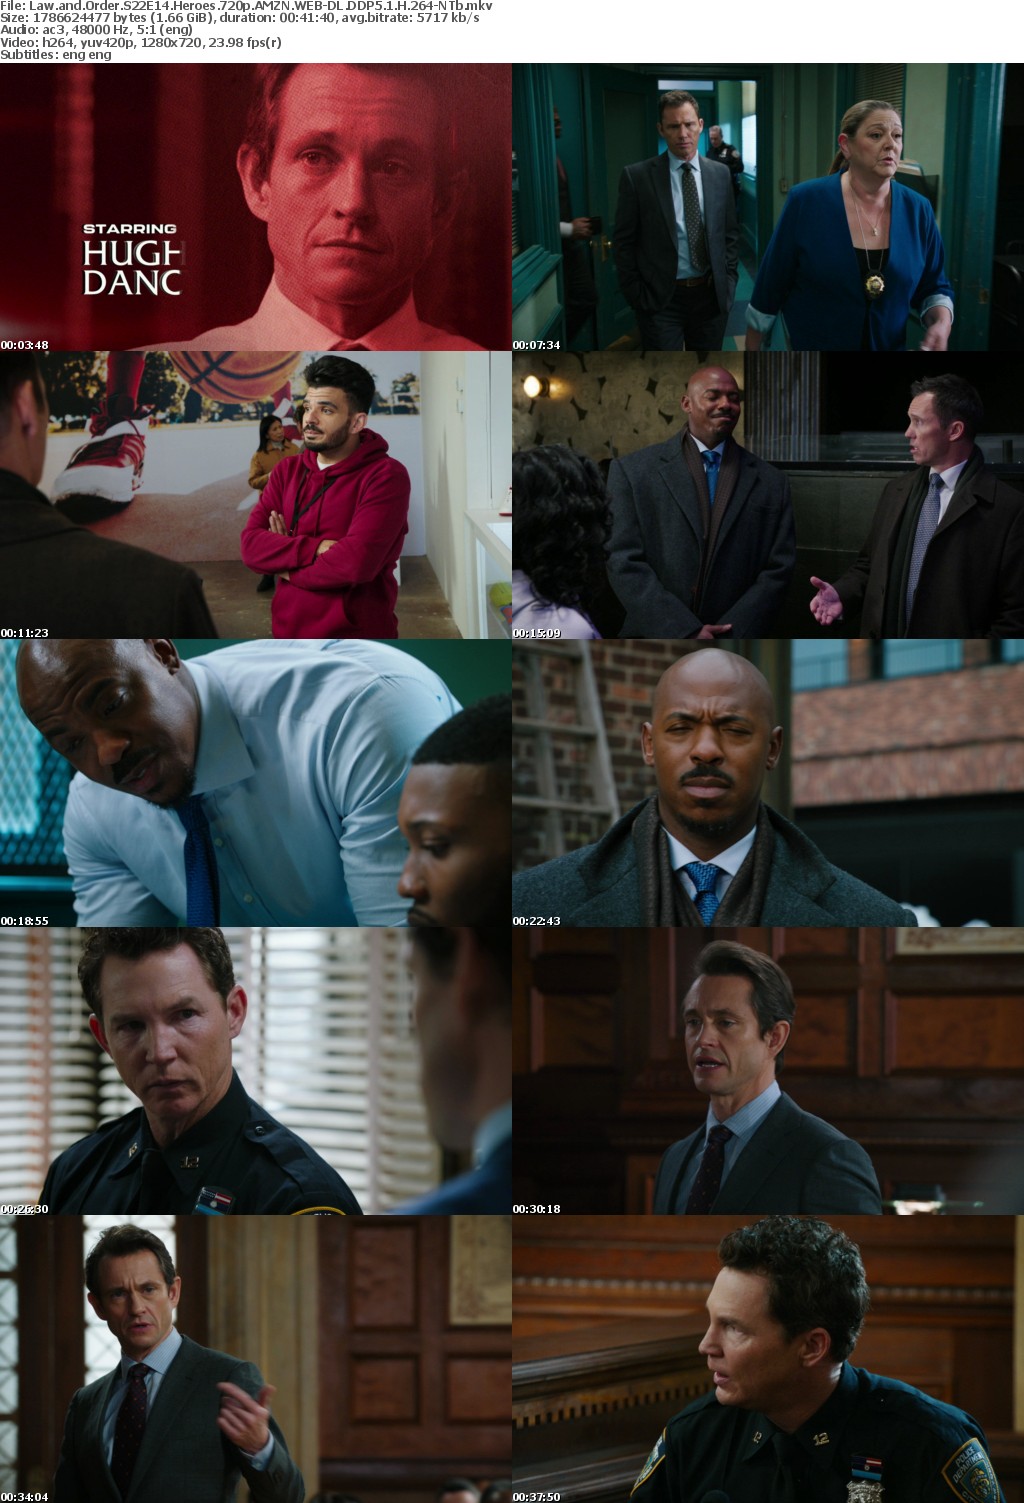 Law and Order S22E14 Heroes 720p AMZN WEBRip DDP5 1 x264-NTb